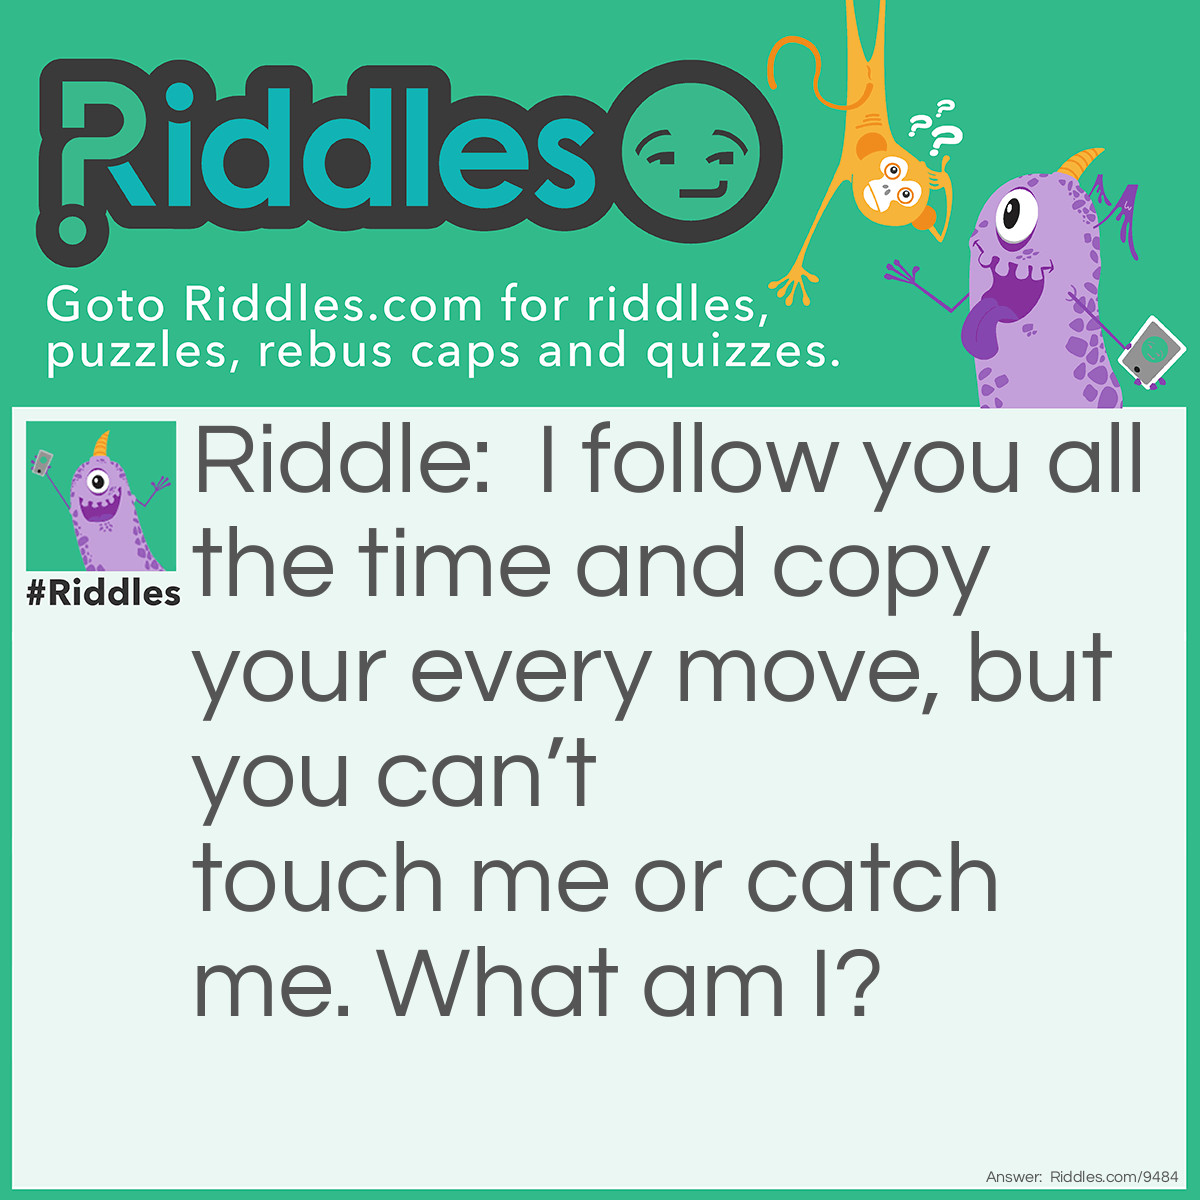 Riddle: I follow you all the time and copy your every move, but you can't touch me or catch me. What am I? Answer: Your shadow.